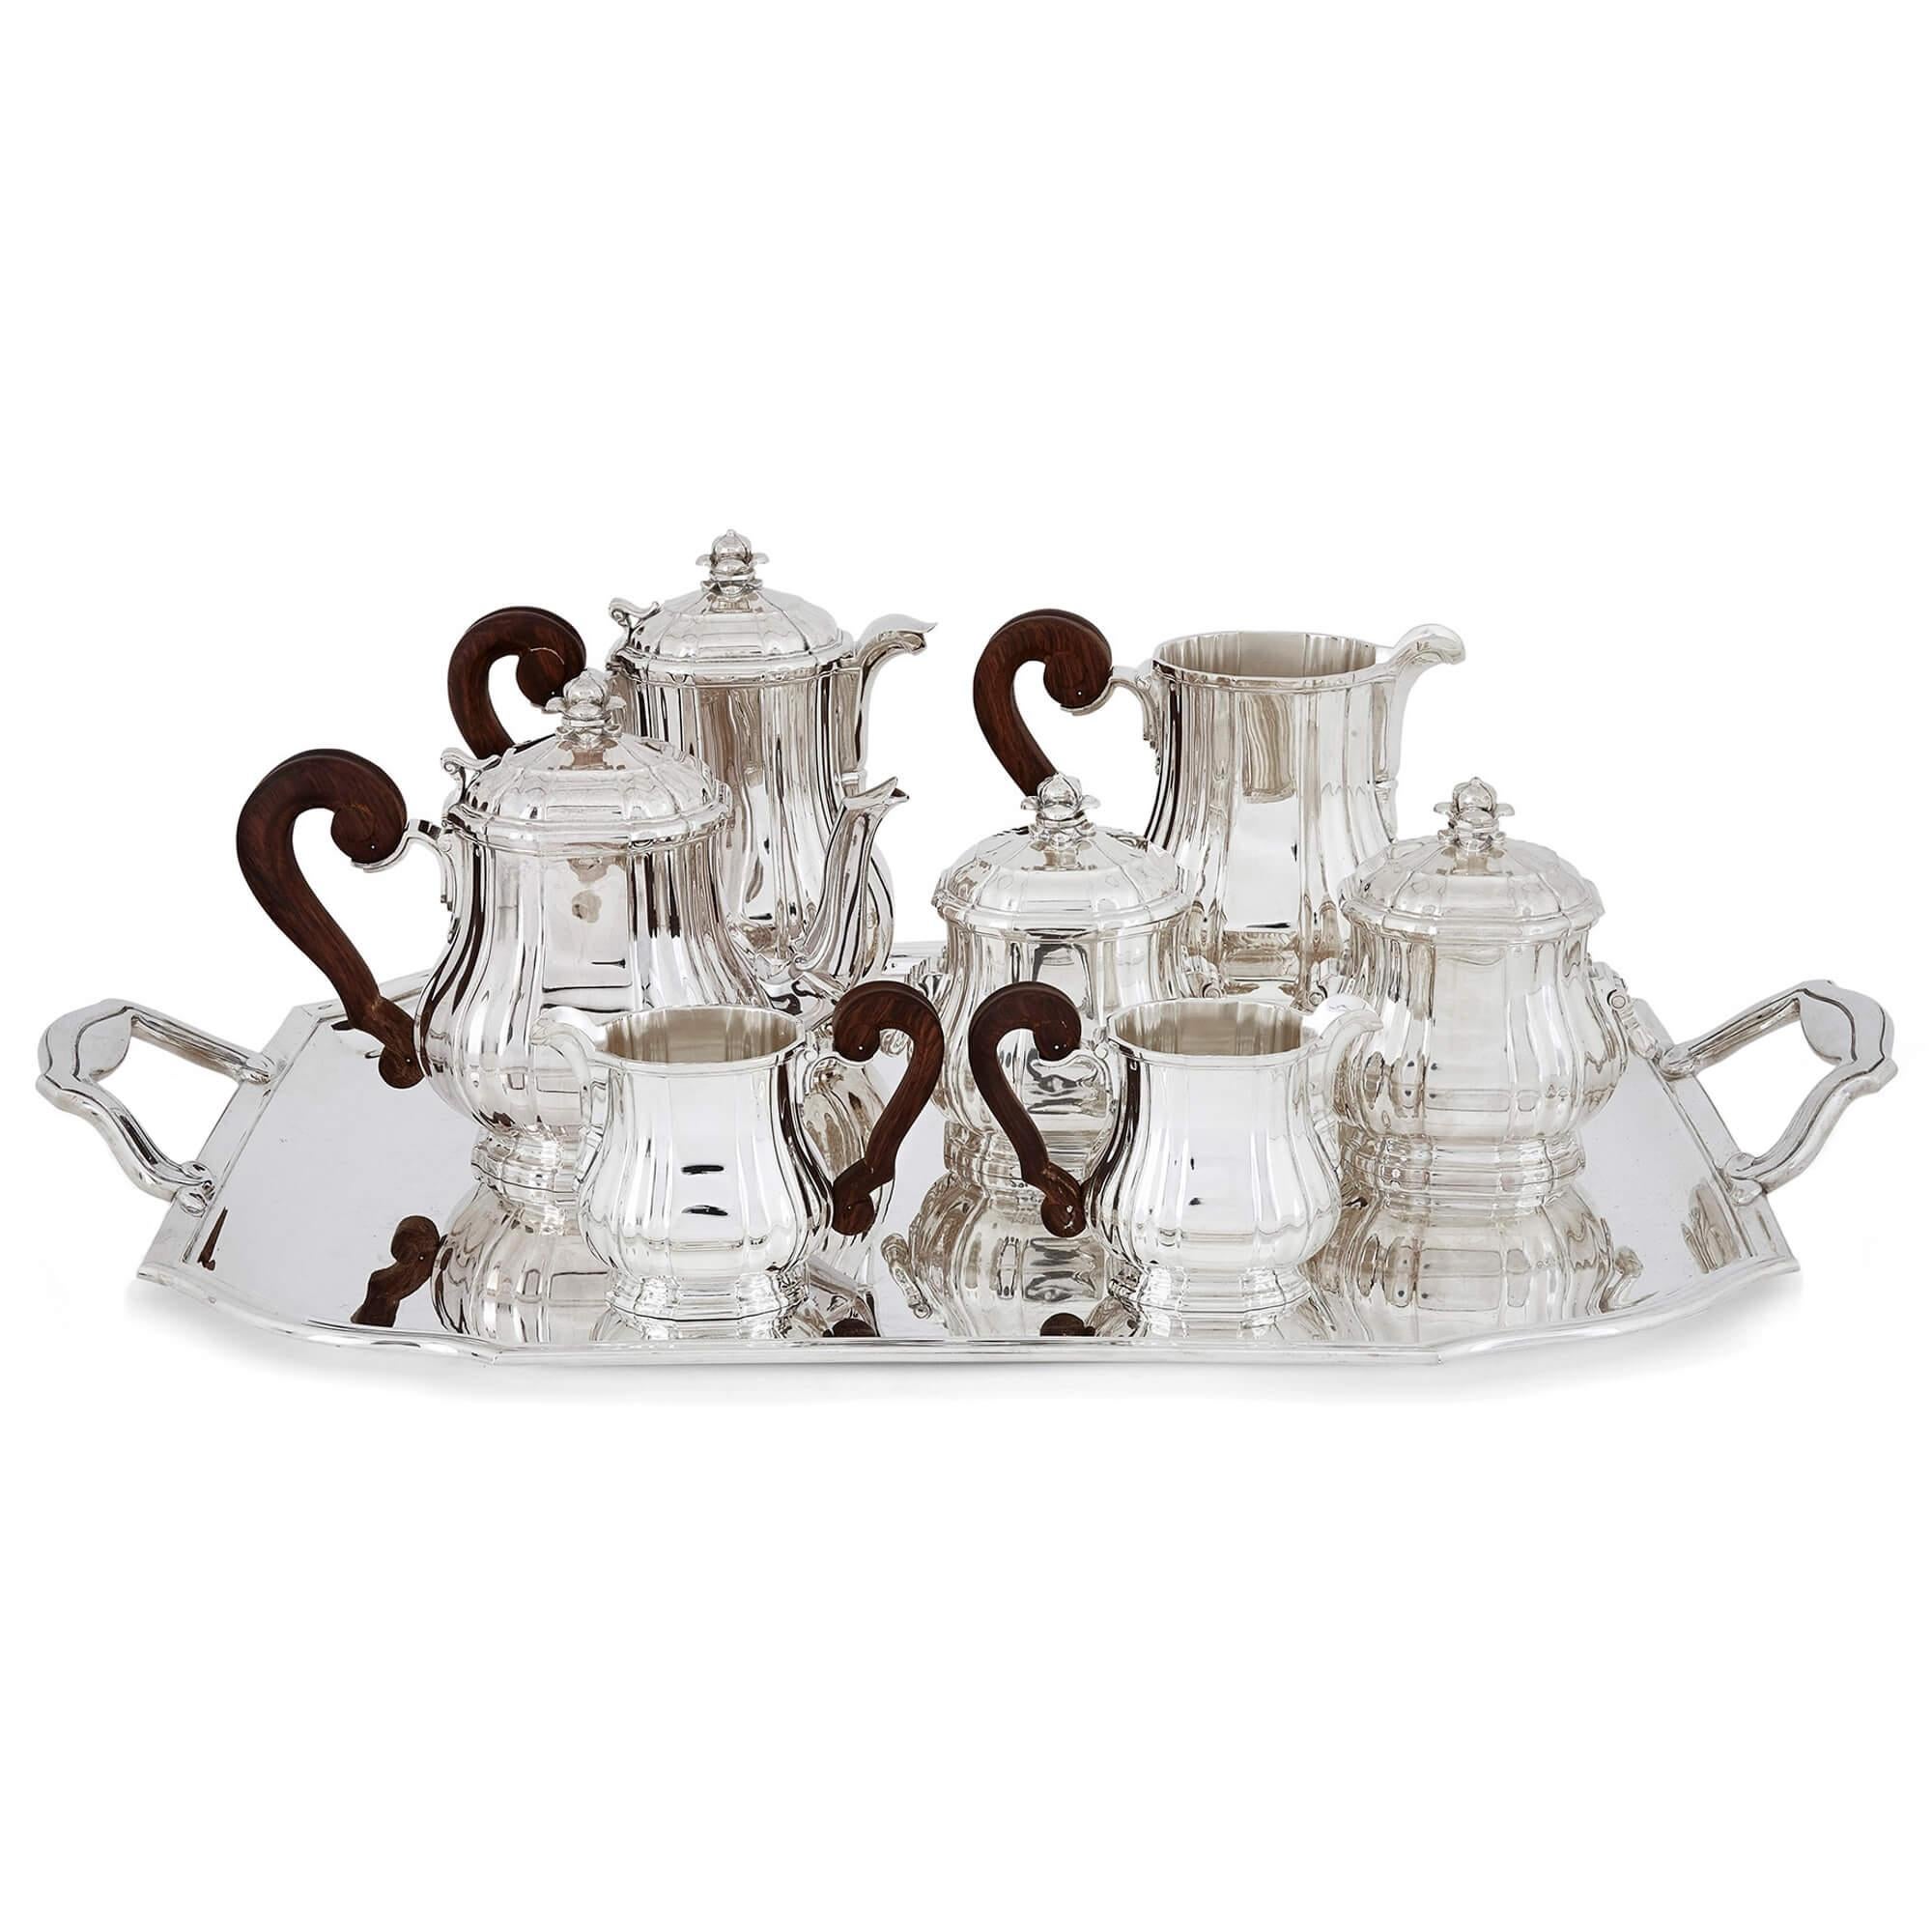 Antique eight-piece silver coffee and tea set by Tétard
French, early 20th century
Tray: Height 6cm, width 73.5cm, depth 46.5cm
Water jug: Height 19cm, width 21cm, depth 11cm

This elegant tea and coffee set features eight pieces: a teapot, a